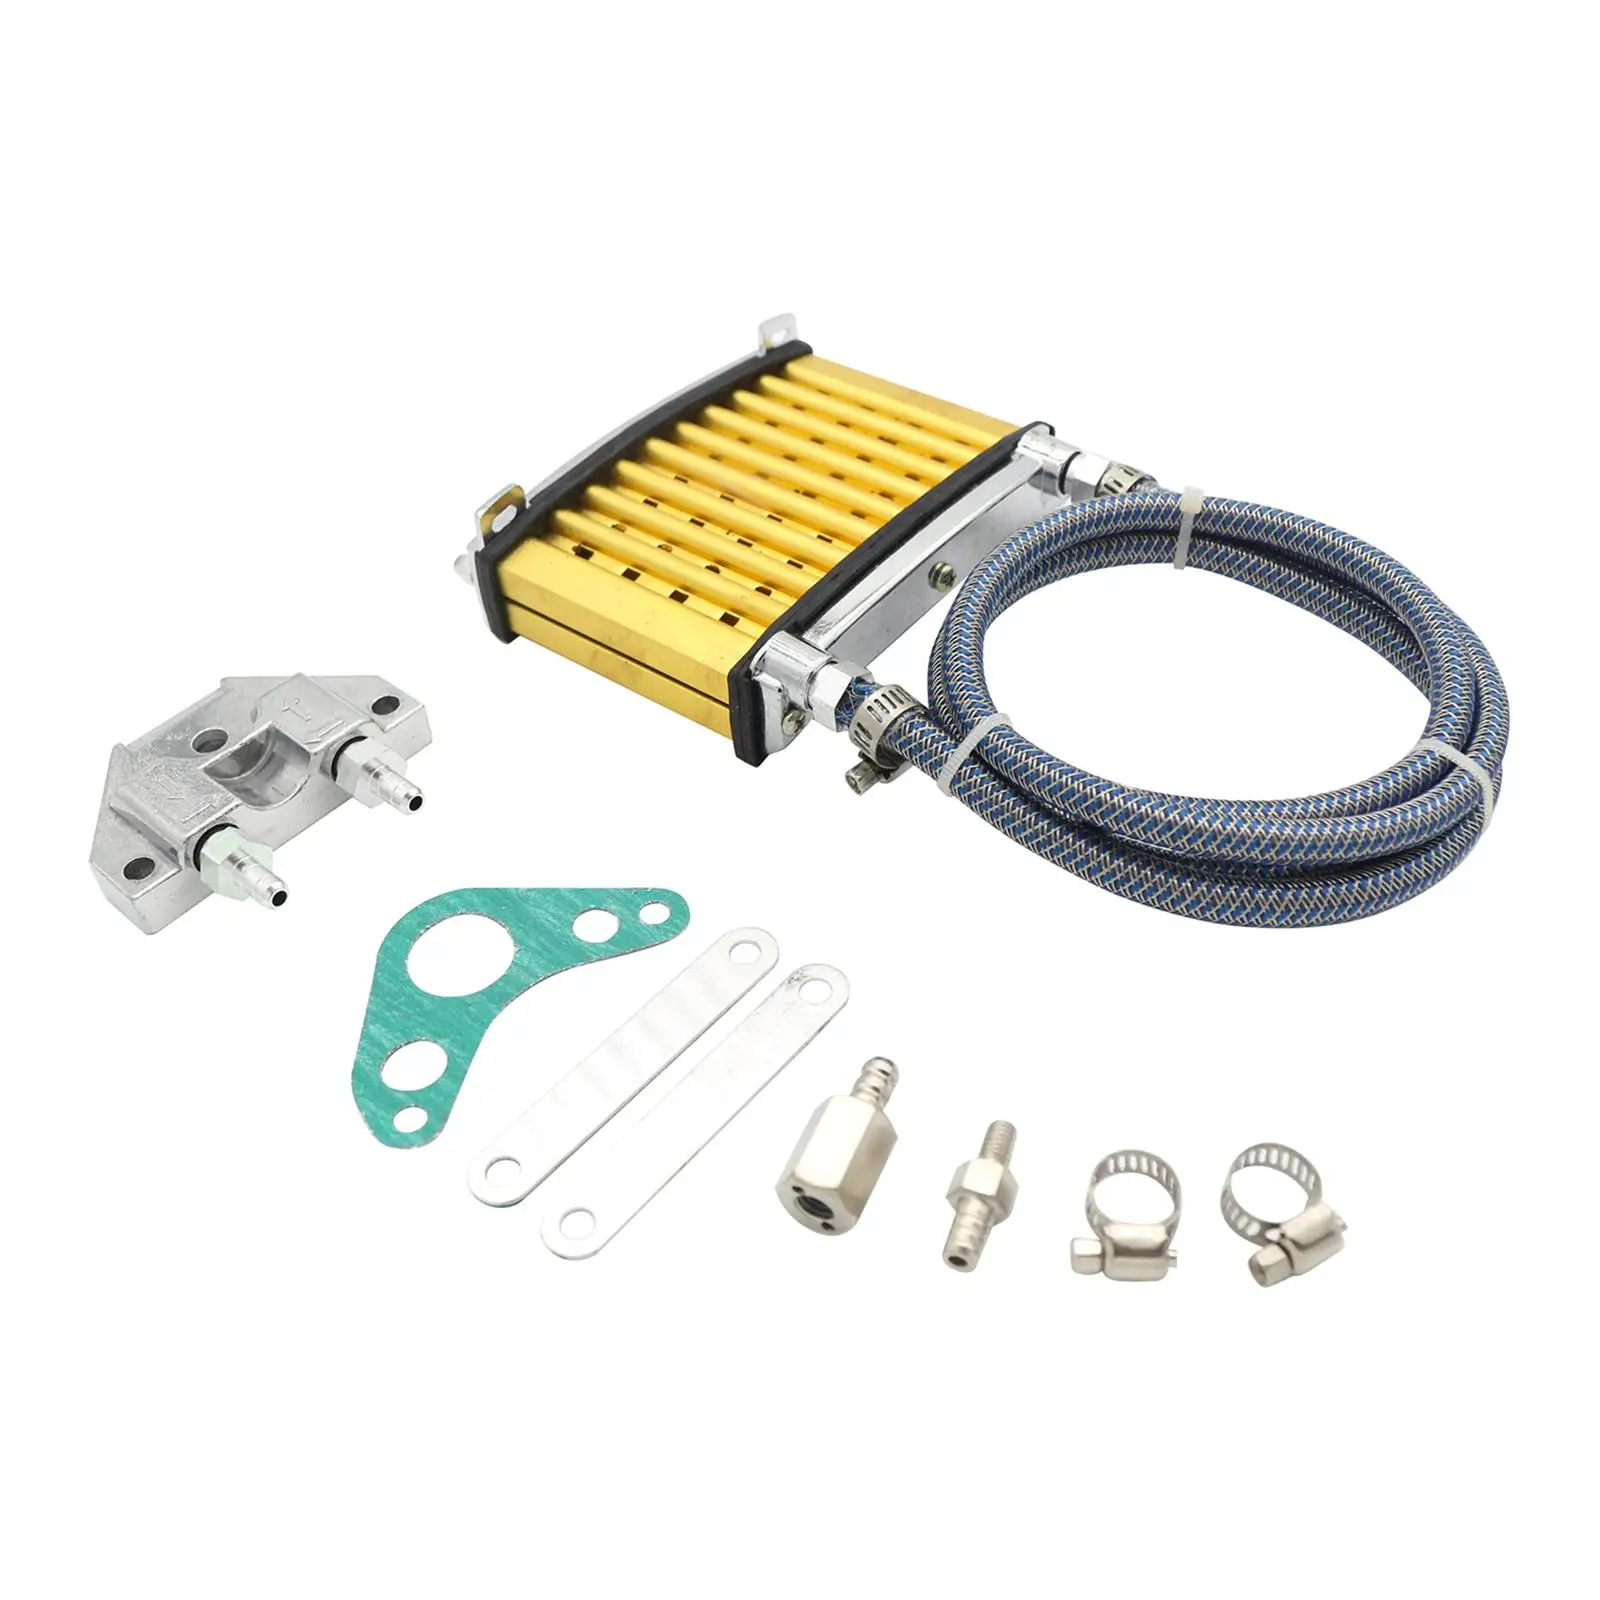 Motorcycle Oil Cooler Radiator System Universal for  1250cc 150cc